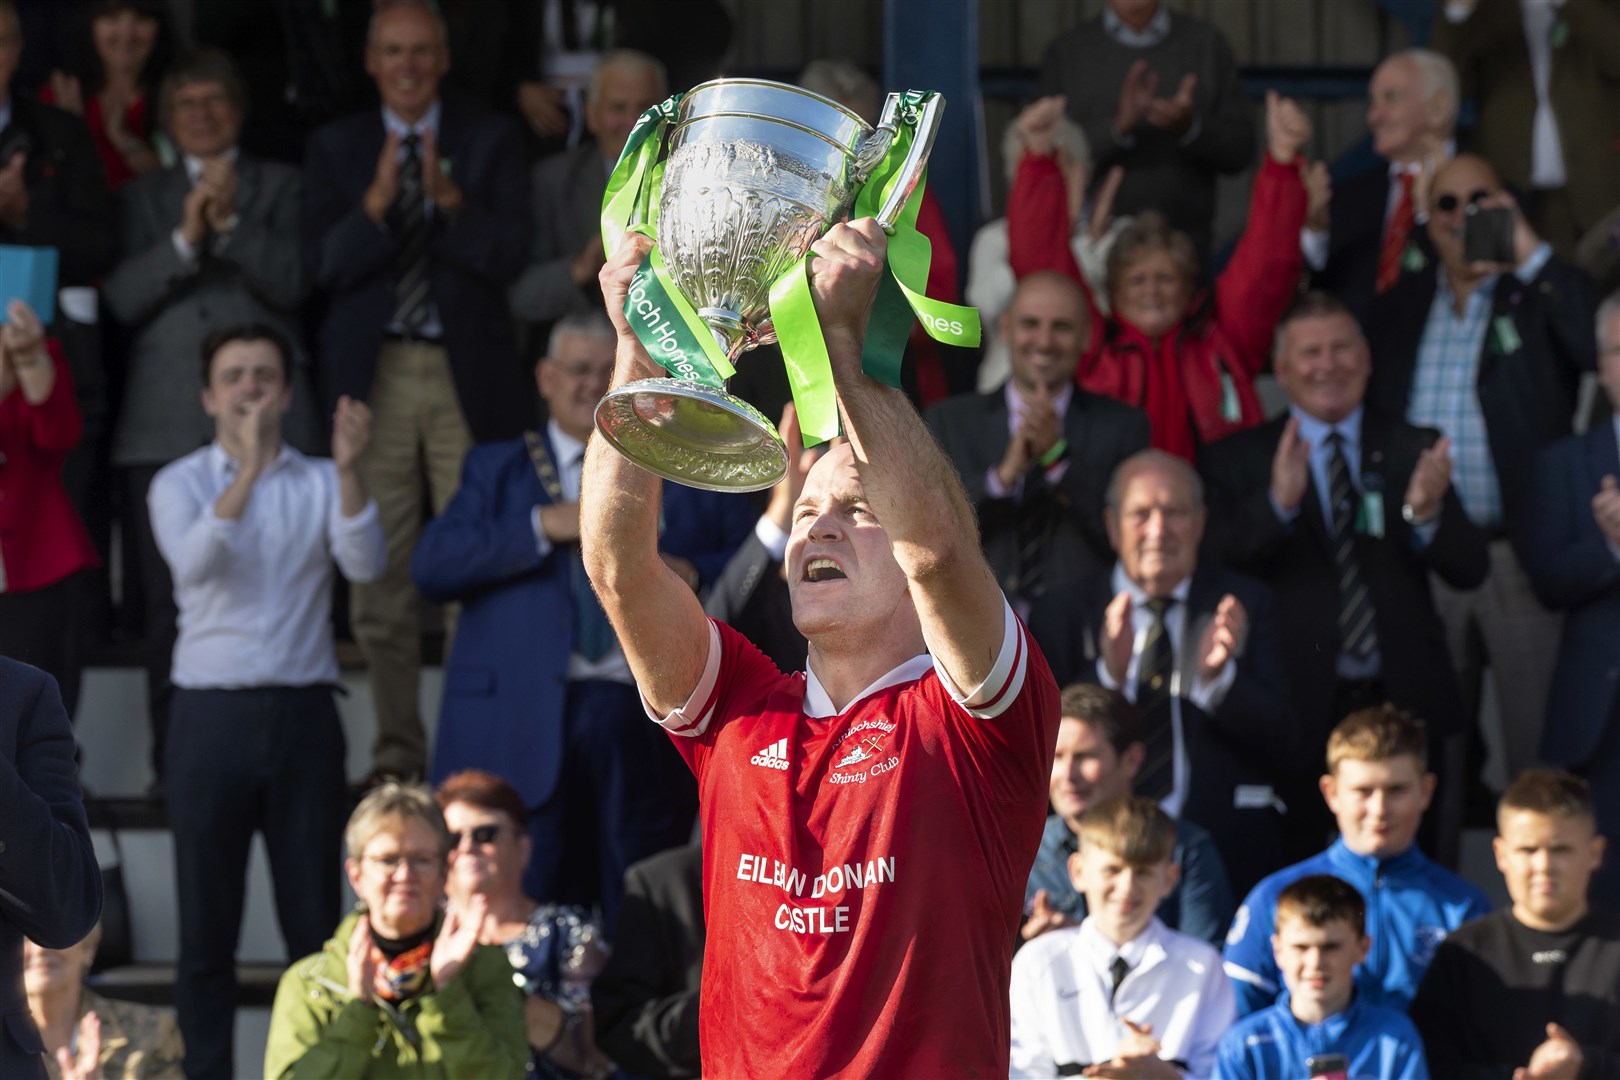 Keith MacRae lifts the Camanachd Cup for Kinlochshiel. Lovat v Kinlochshiel in the Tulloch Homes Camanachd Cup Final, played at Mossfield, Oban.